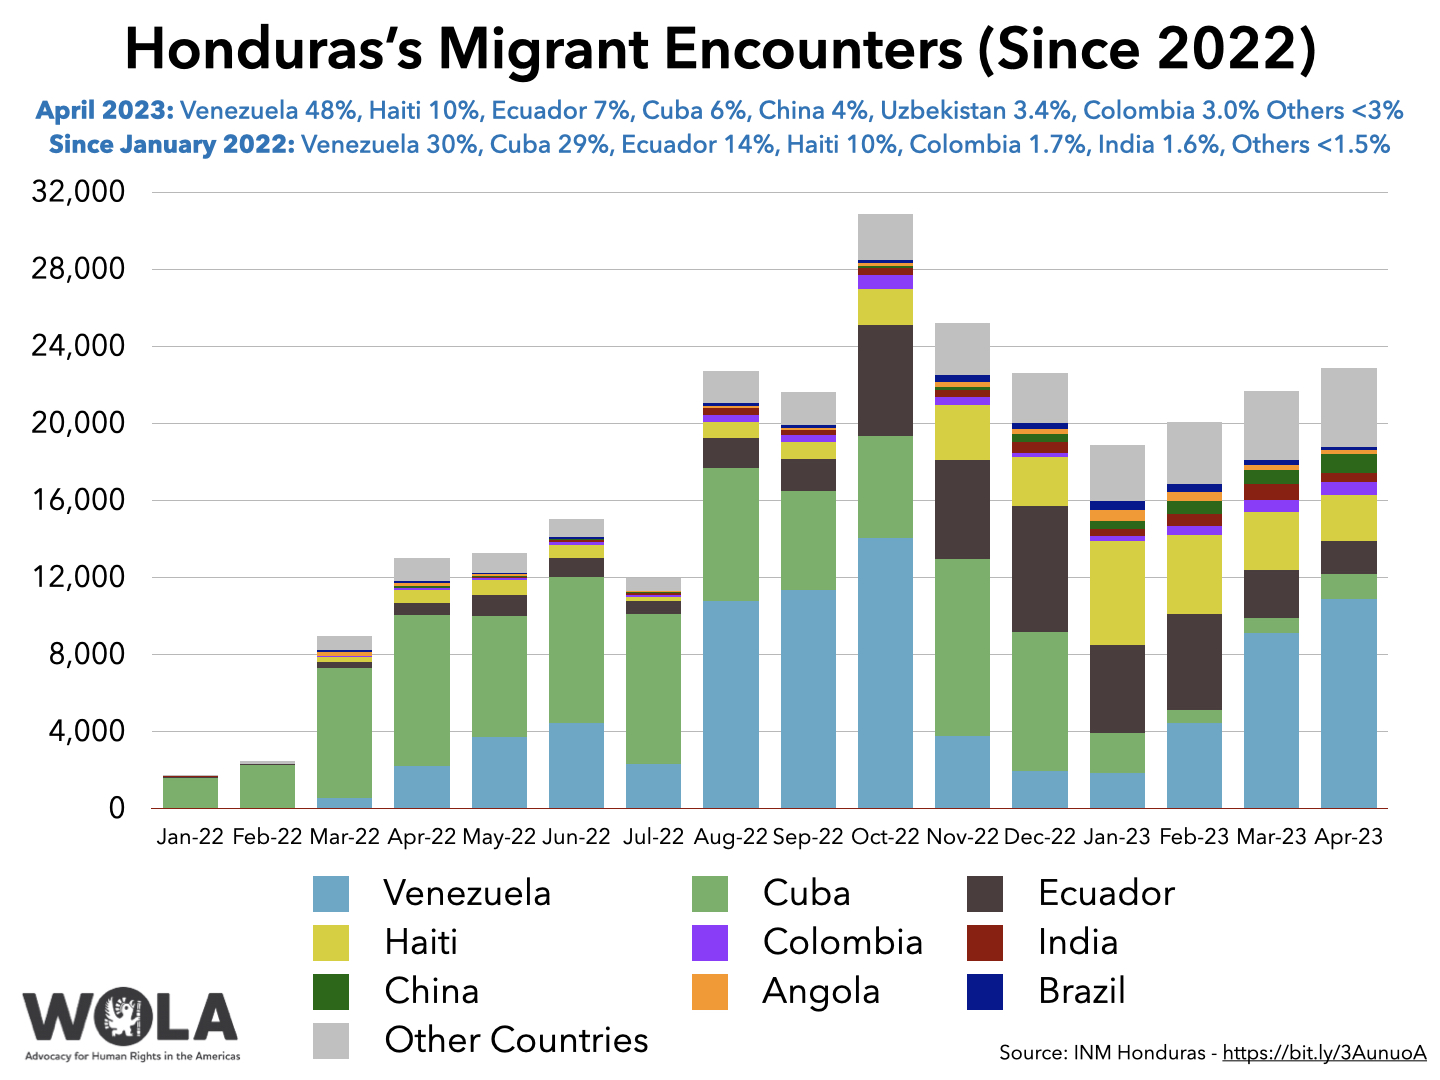 Halfway to the U.S.: A Report from Honduras on Migration - WOLA